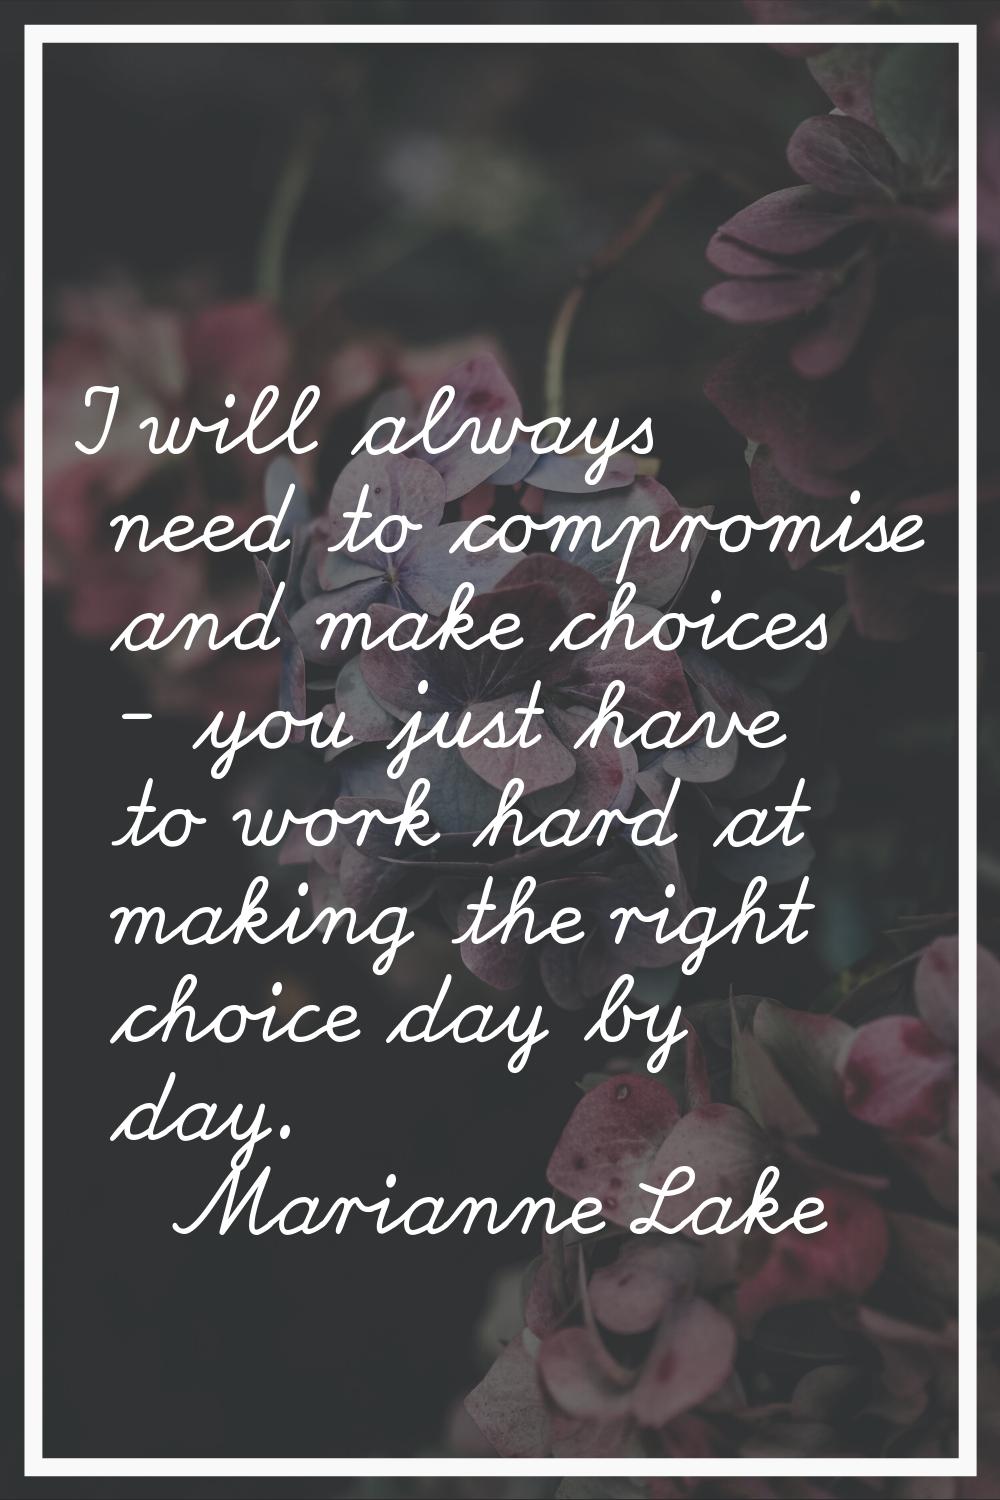 I will always need to compromise and make choices - you just have to work hard at making the right 